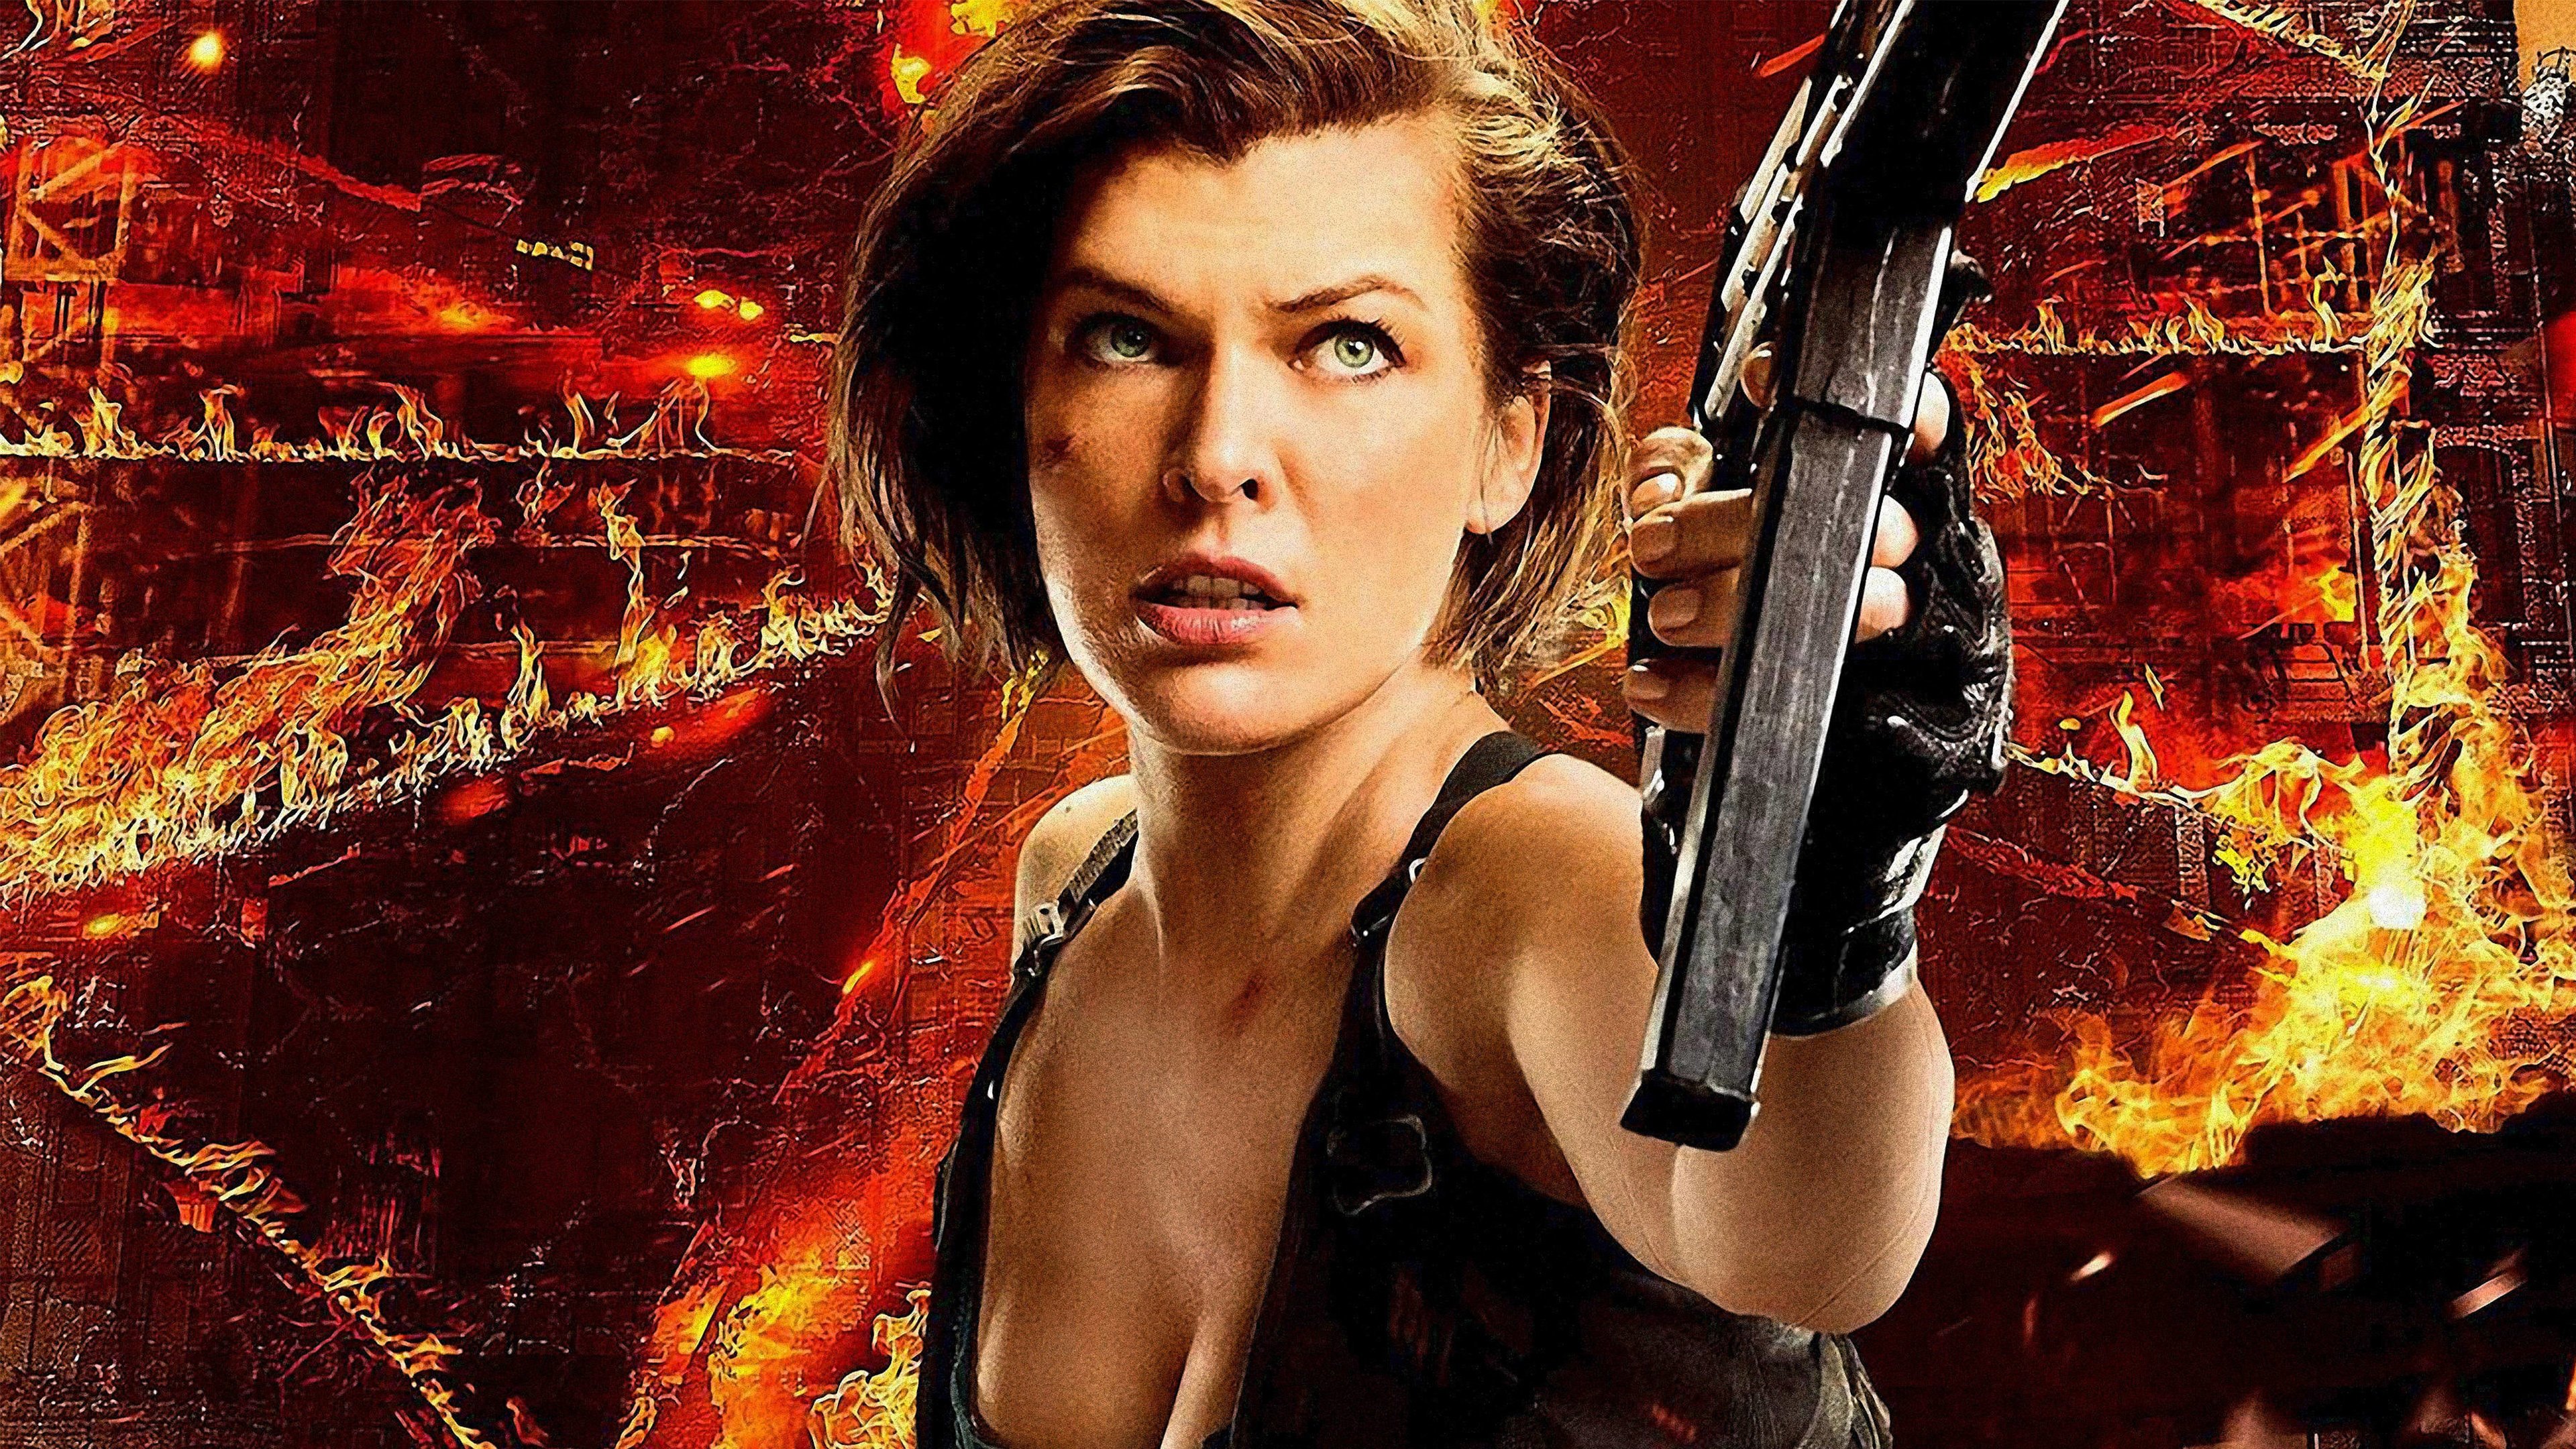 Watch Resident Evil: The Final Chapter